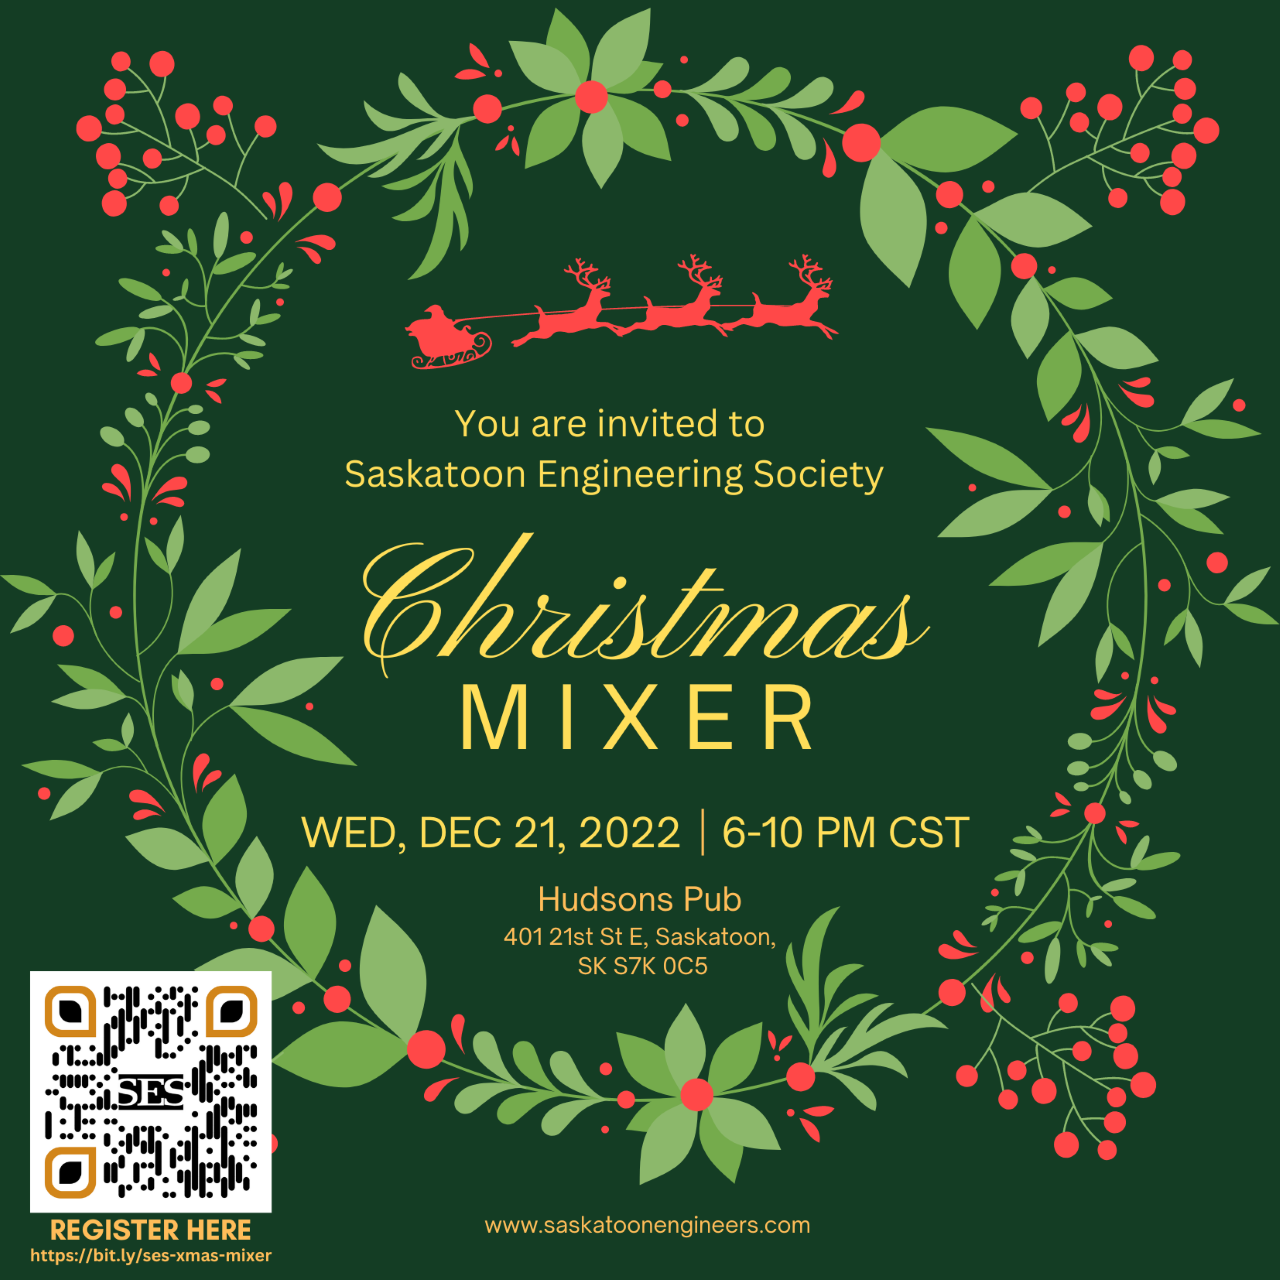 Your are invited to Saskatoon Engineering Society Christmas Mixer at Hudsons Pub